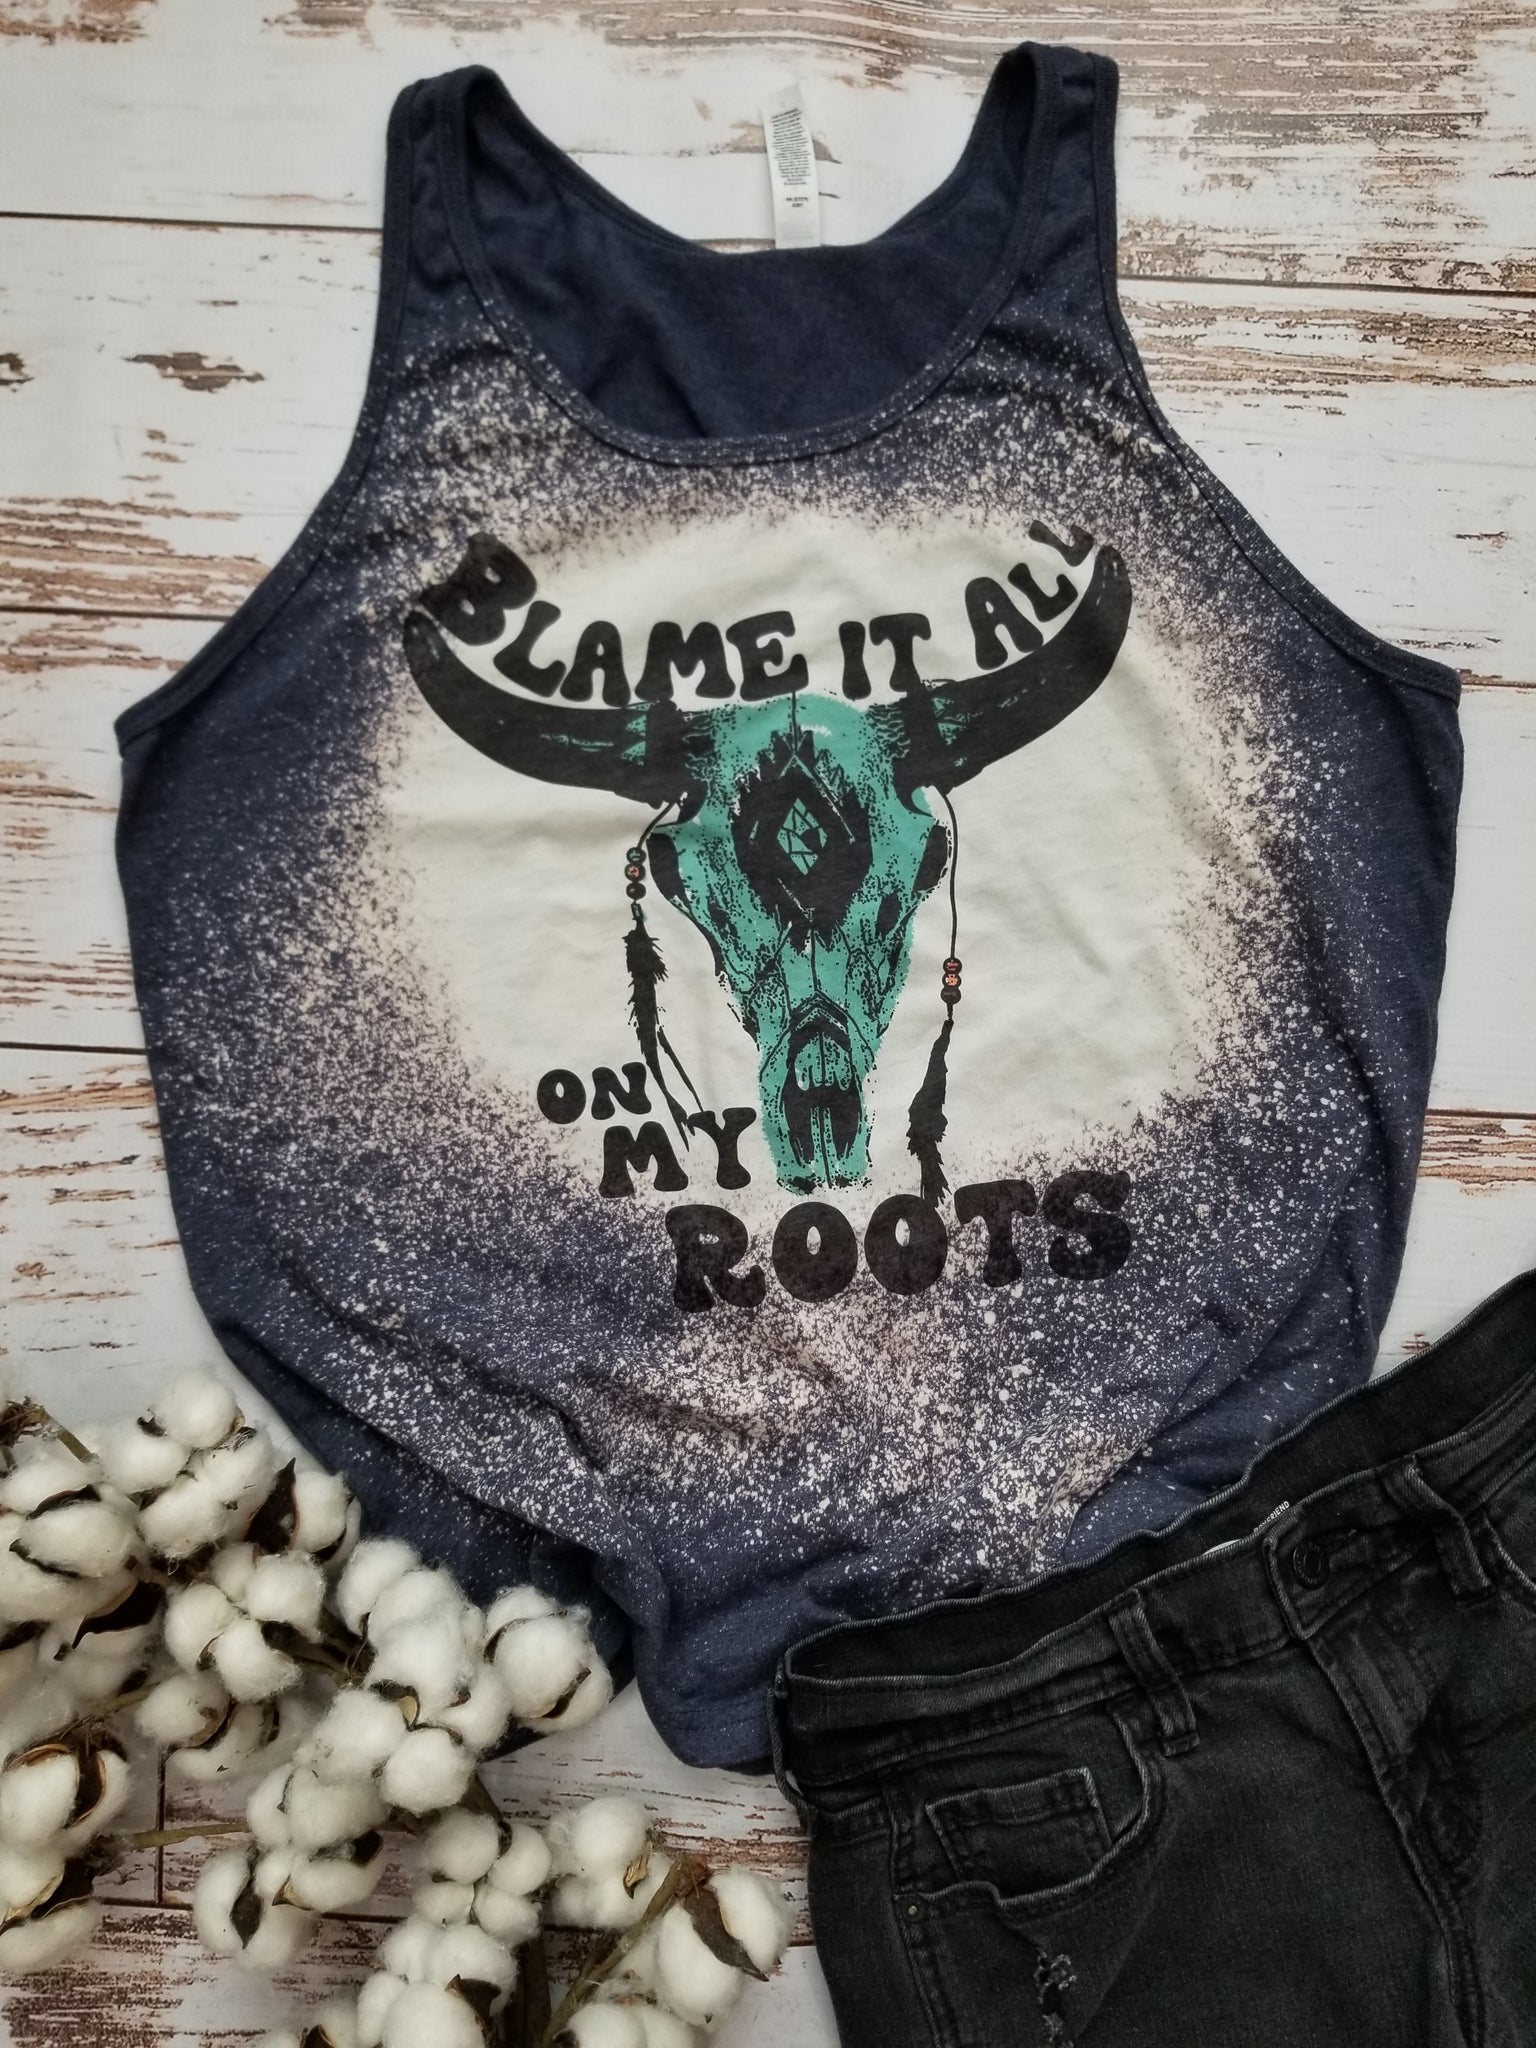 Blame it all on my roots navy Unisex Tank